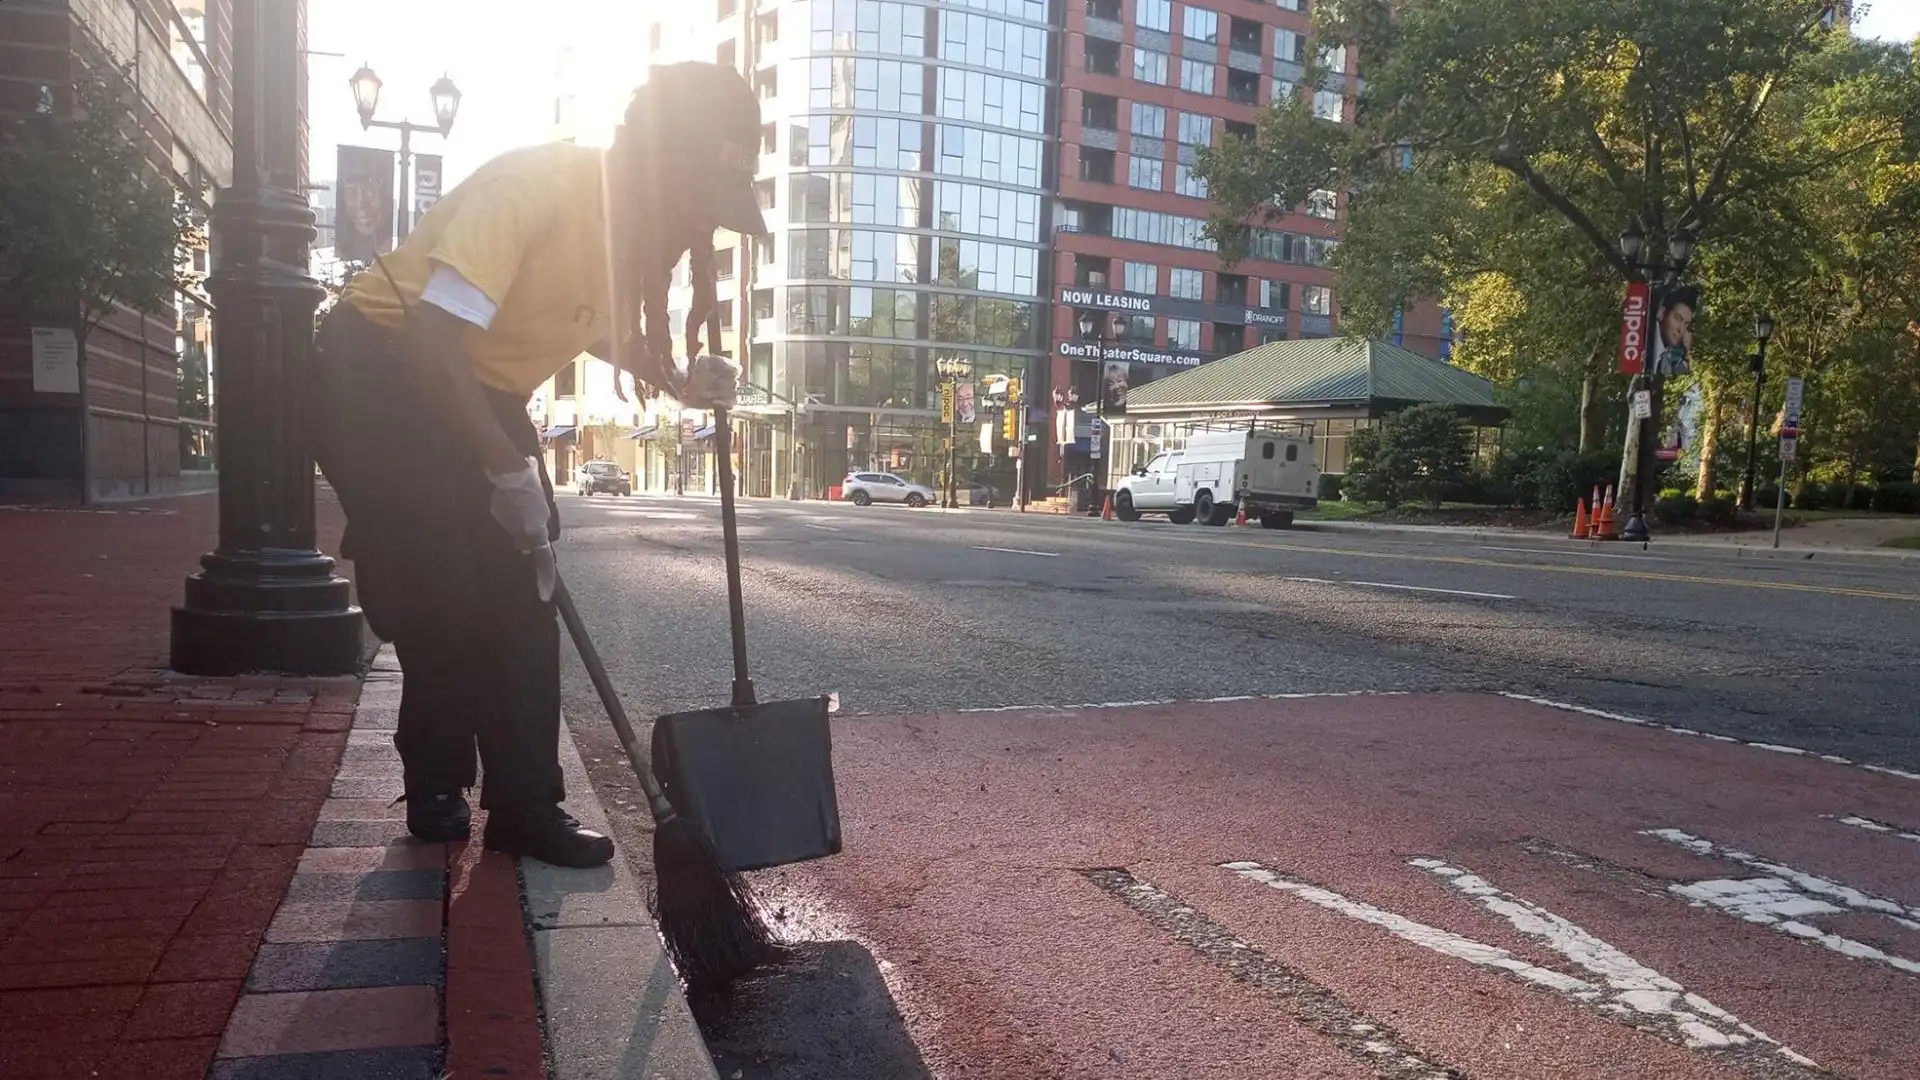 A maintenance worker sweeping the street.